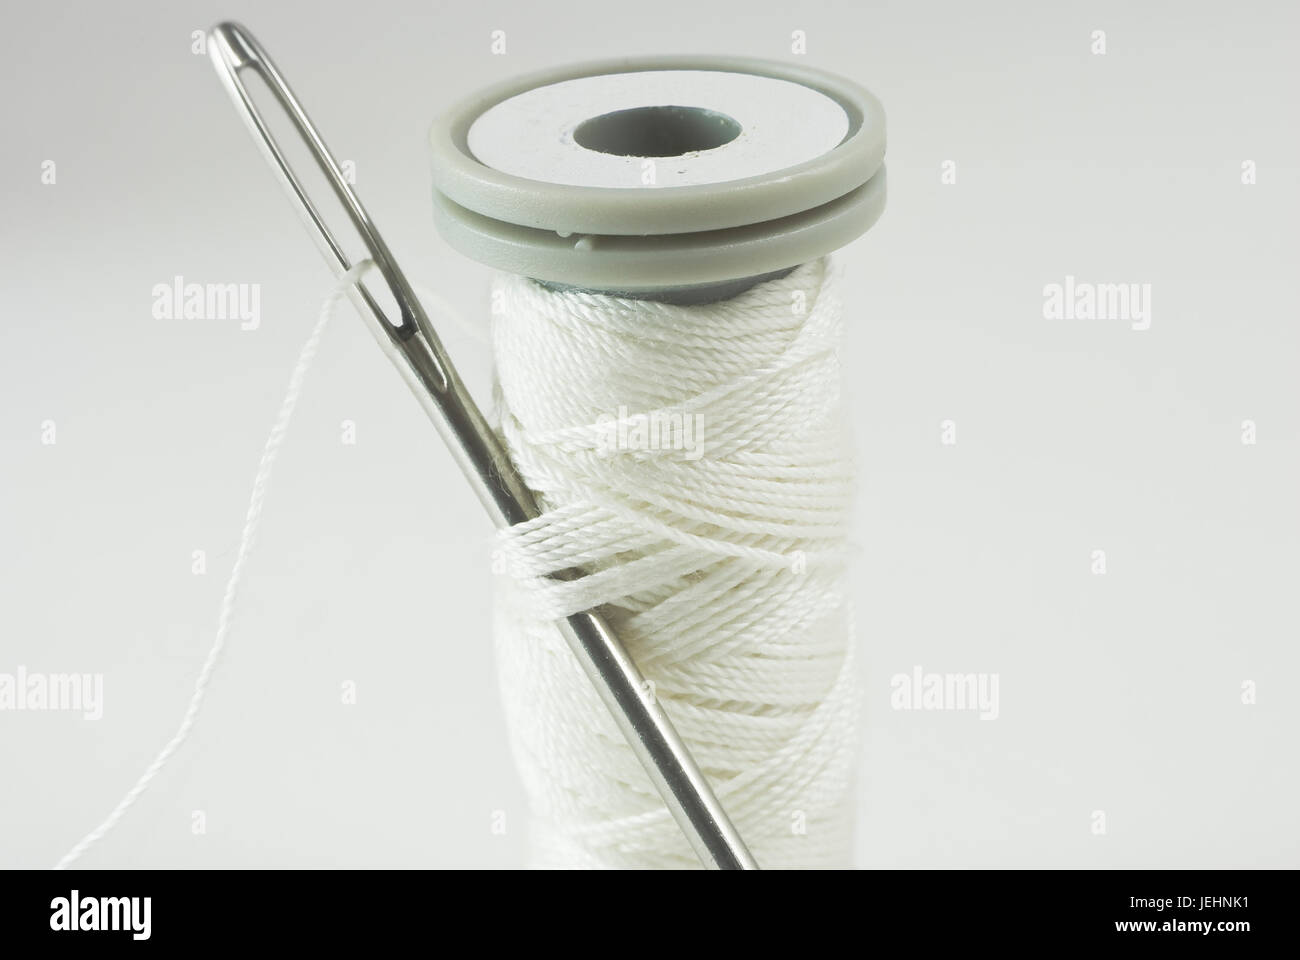 Black Thread Reel with a Needle Stock Photo - Image of object